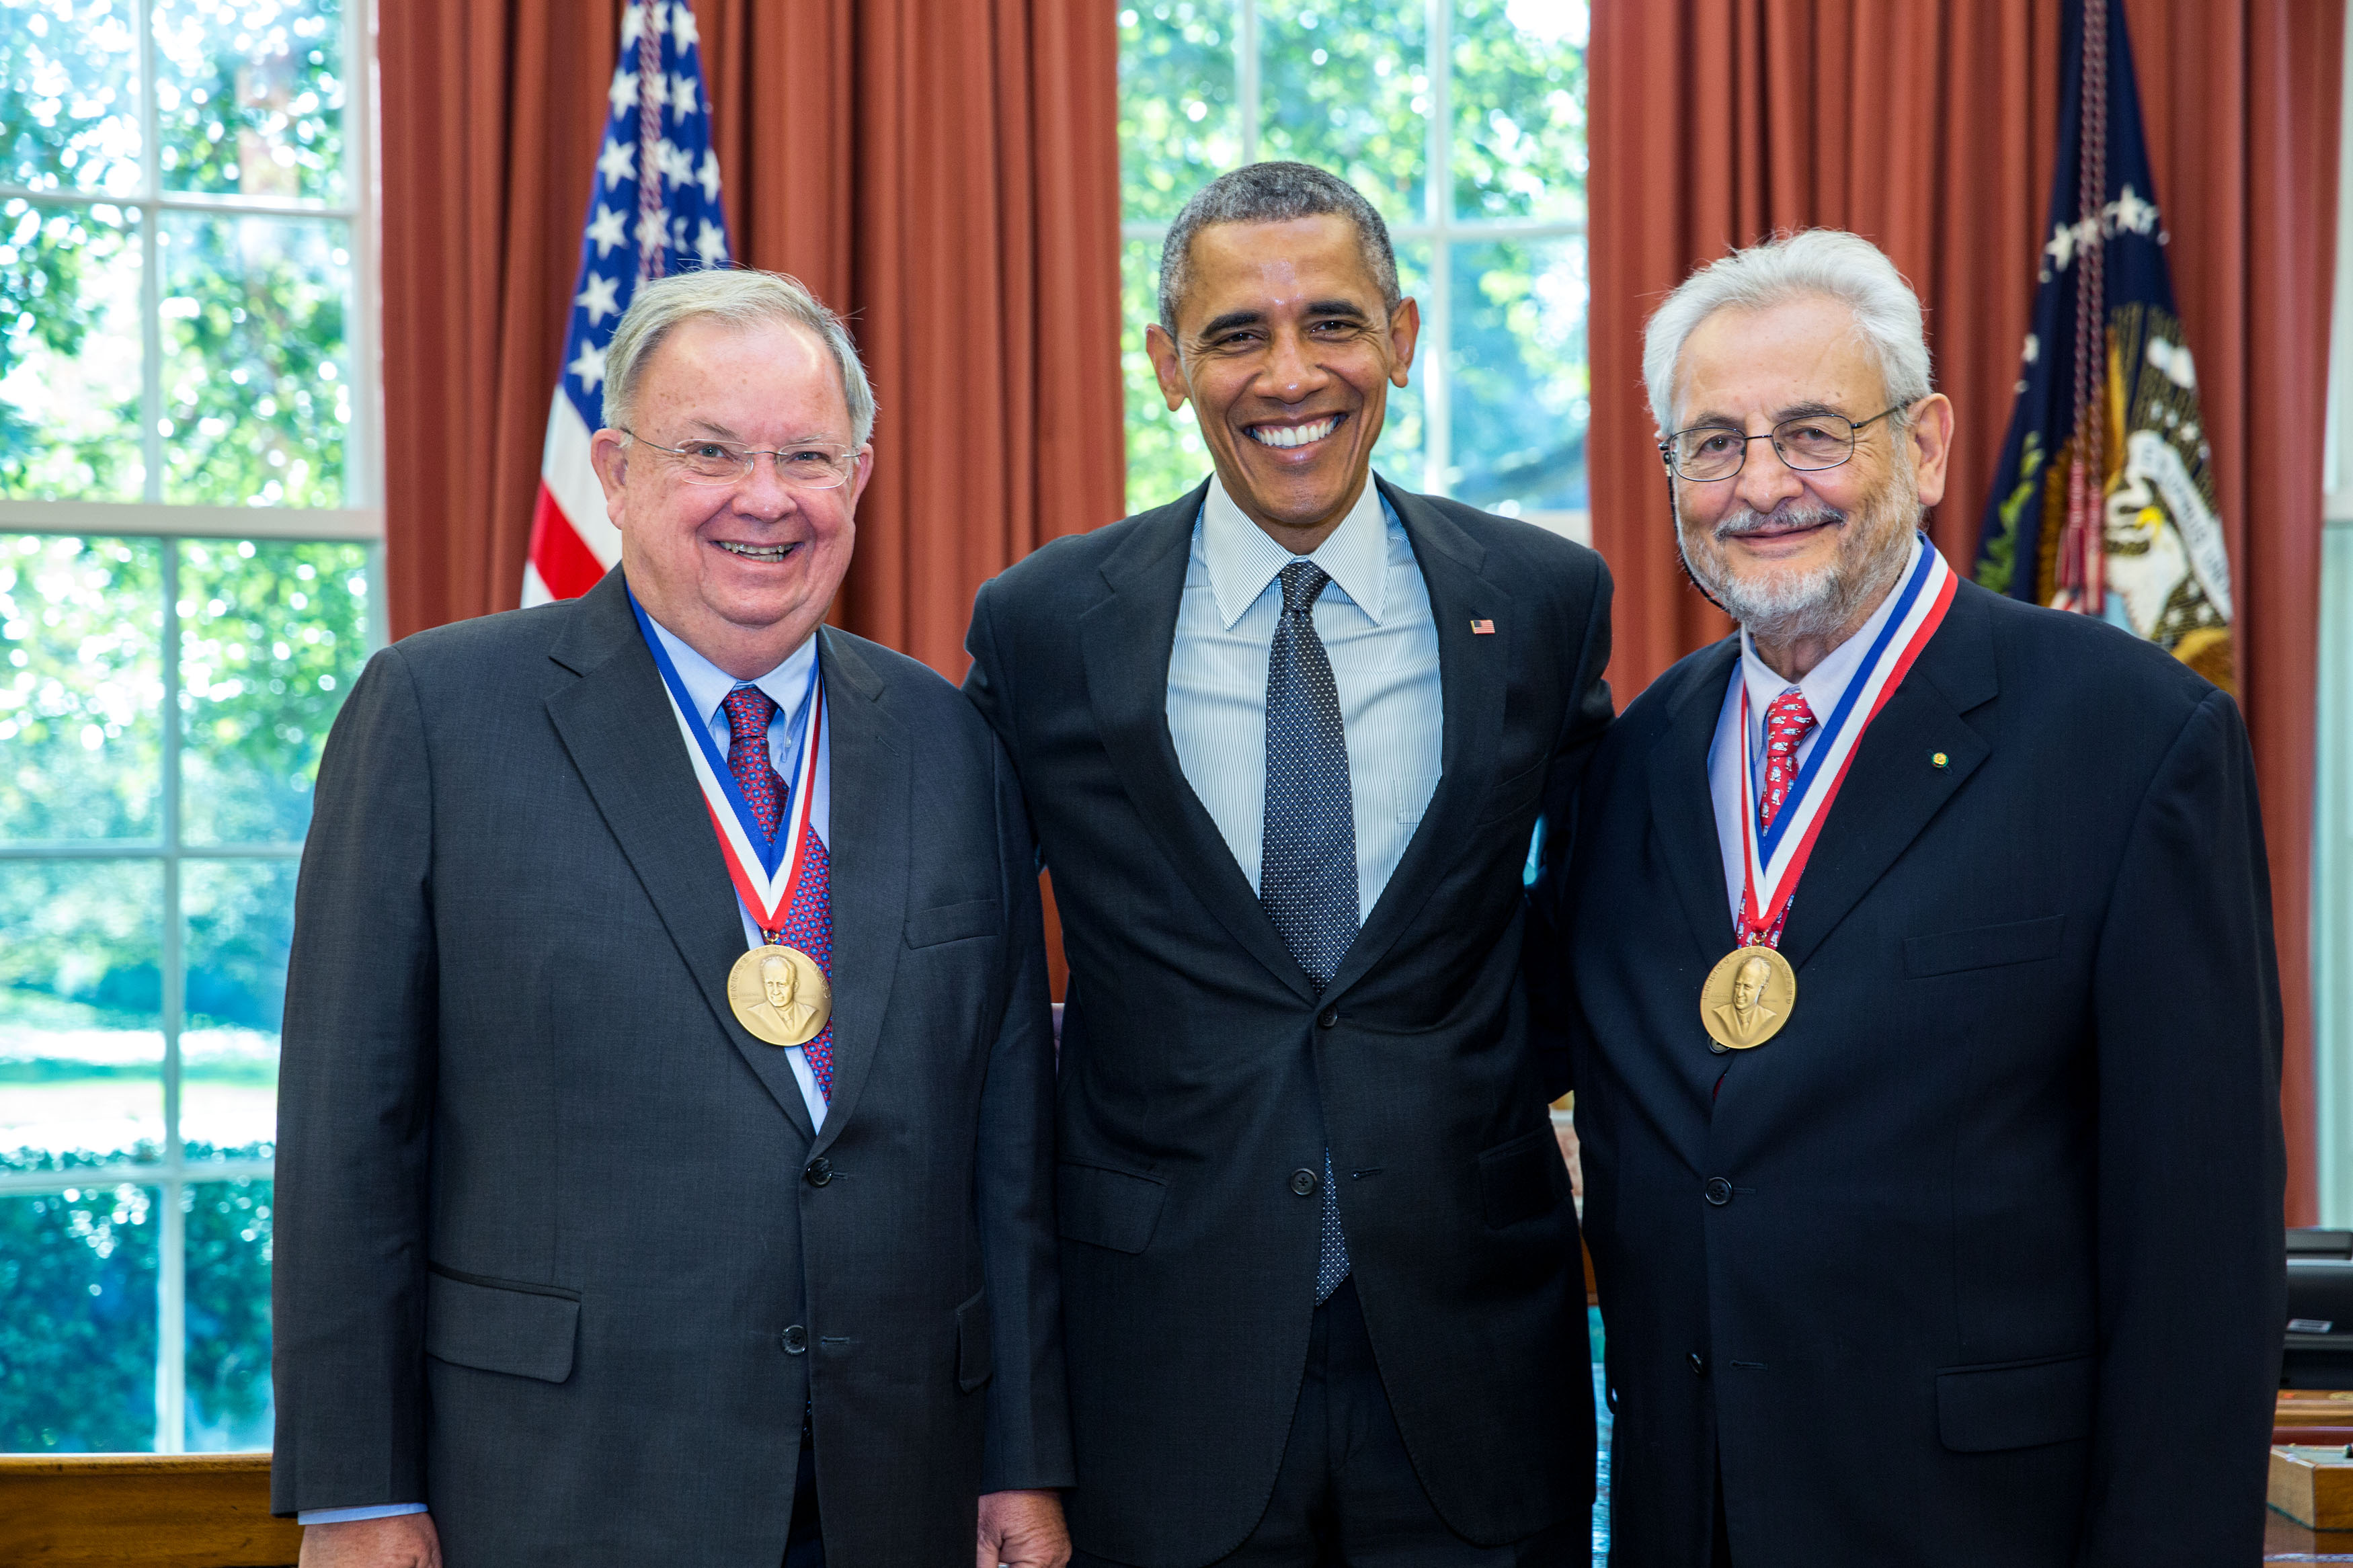 President Barack Obama greets 2014 Enrico Fermi Award recipients Charles Shank, left, and Claudio Pellegrini in the Oval Office, Oct. 20, 2015. (Official White House Photo by Pete Souza)